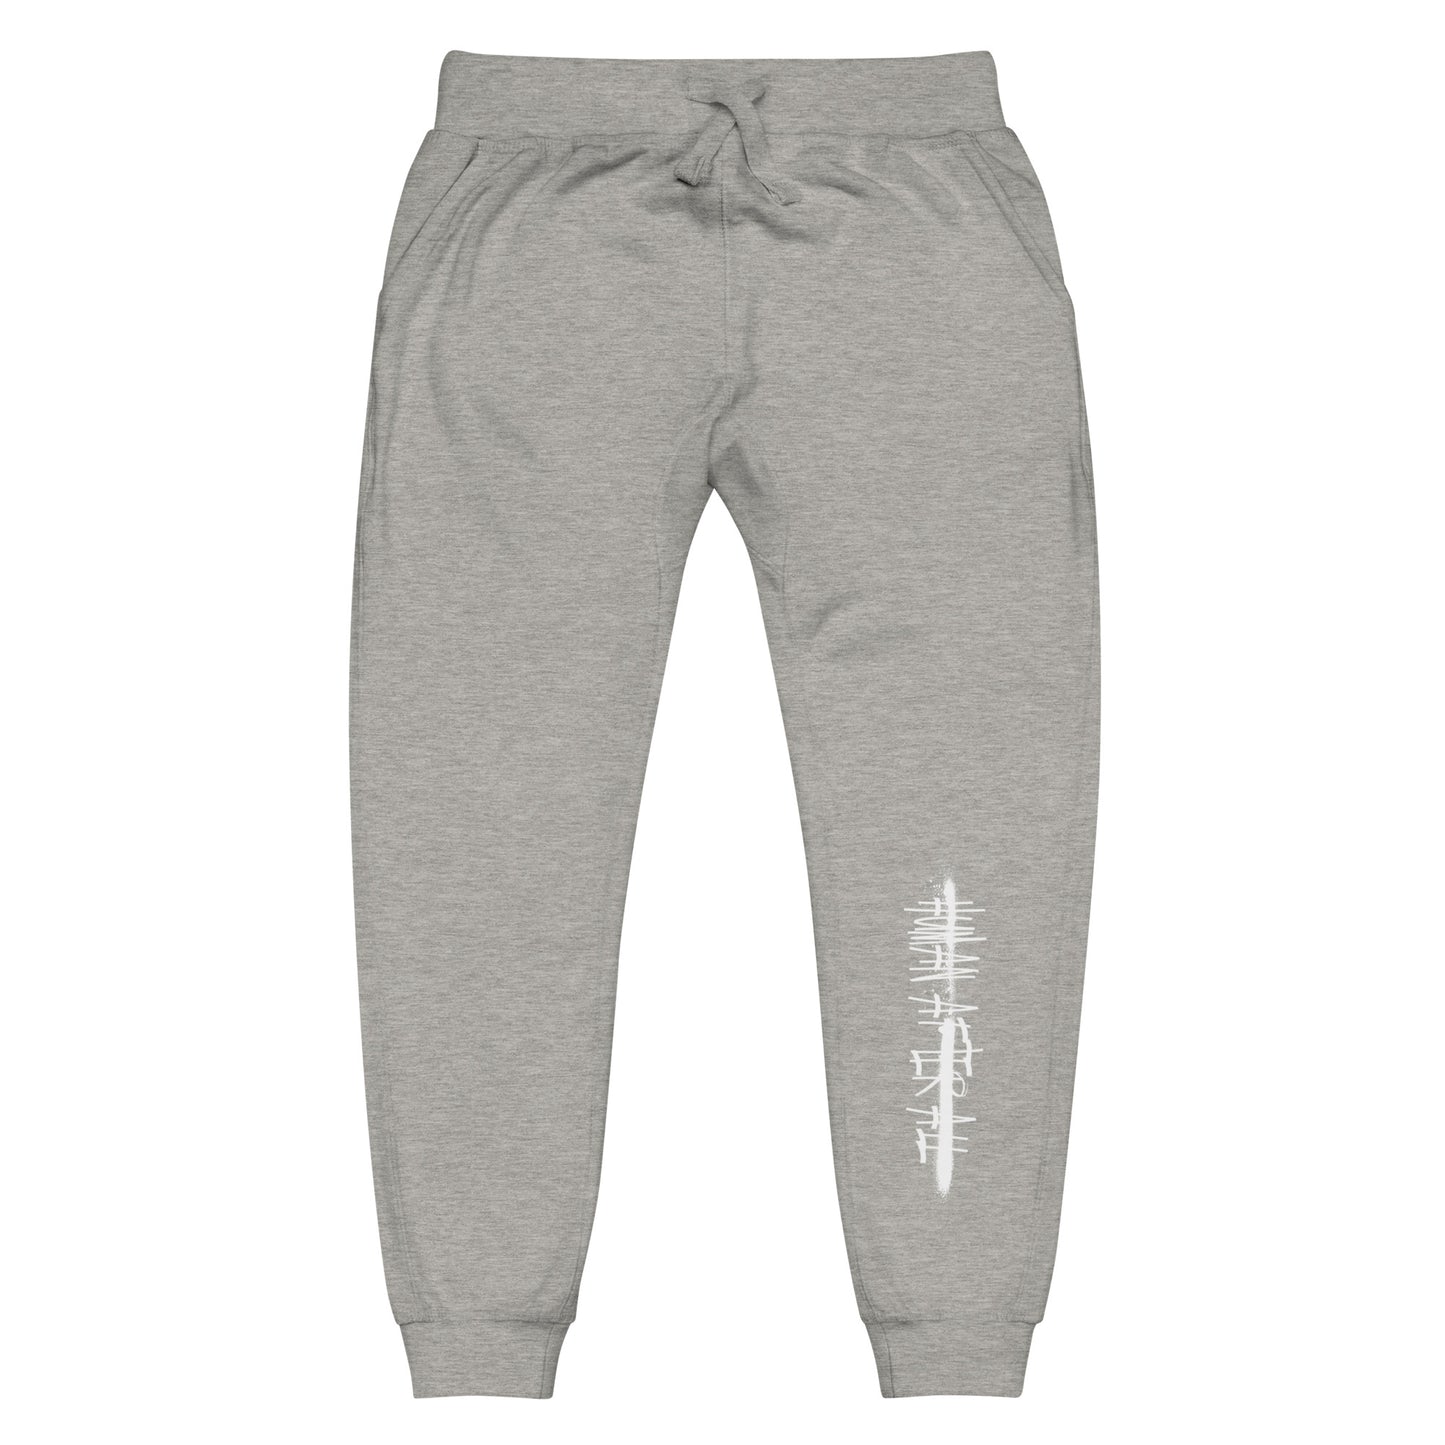 Human After All sweatpants